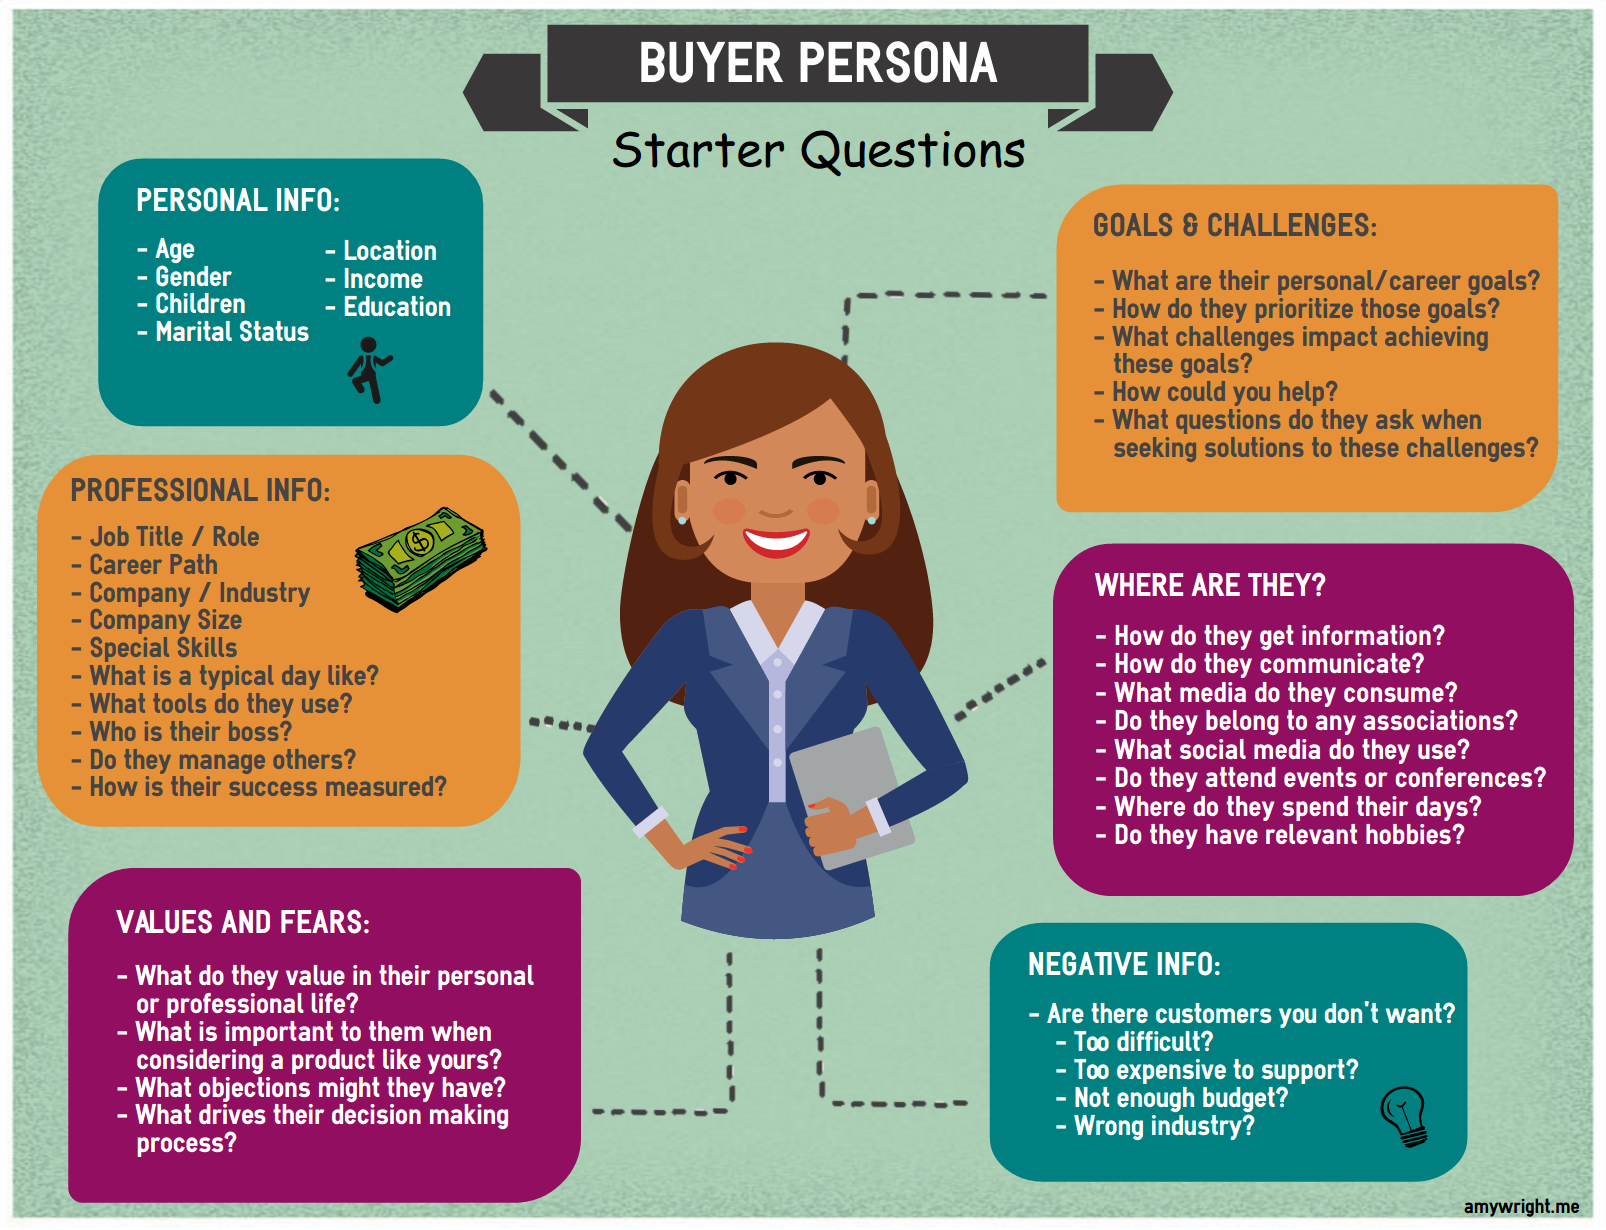 EXAMPLE OF BUYER PERSONA STARTER QUESTIONS